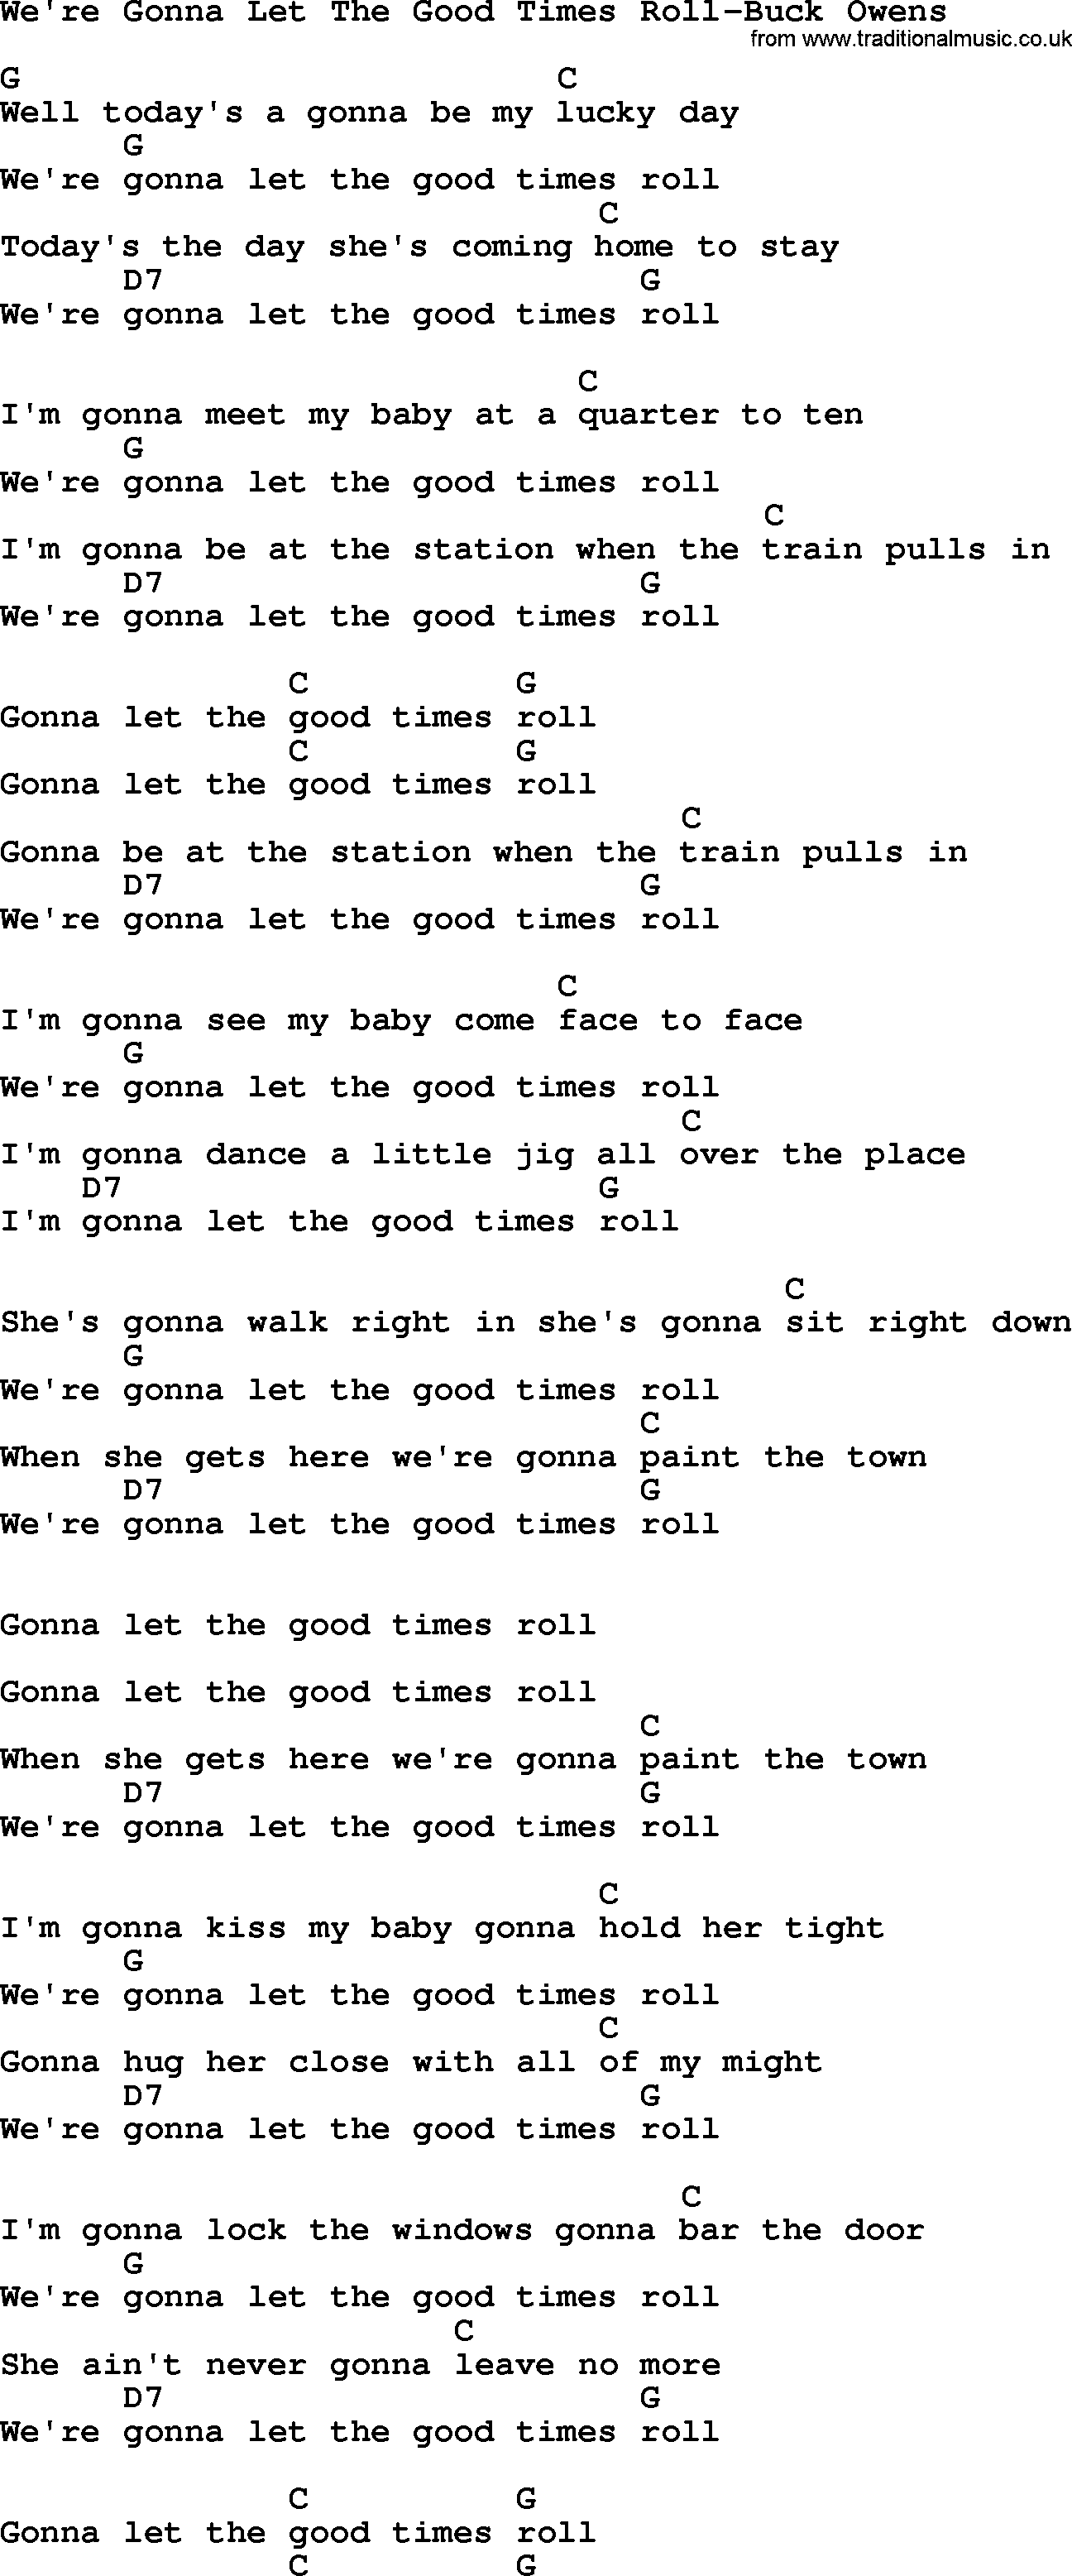 Country music song: We're Gonna Let The Good Times Roll-Buck Owens lyrics and chords